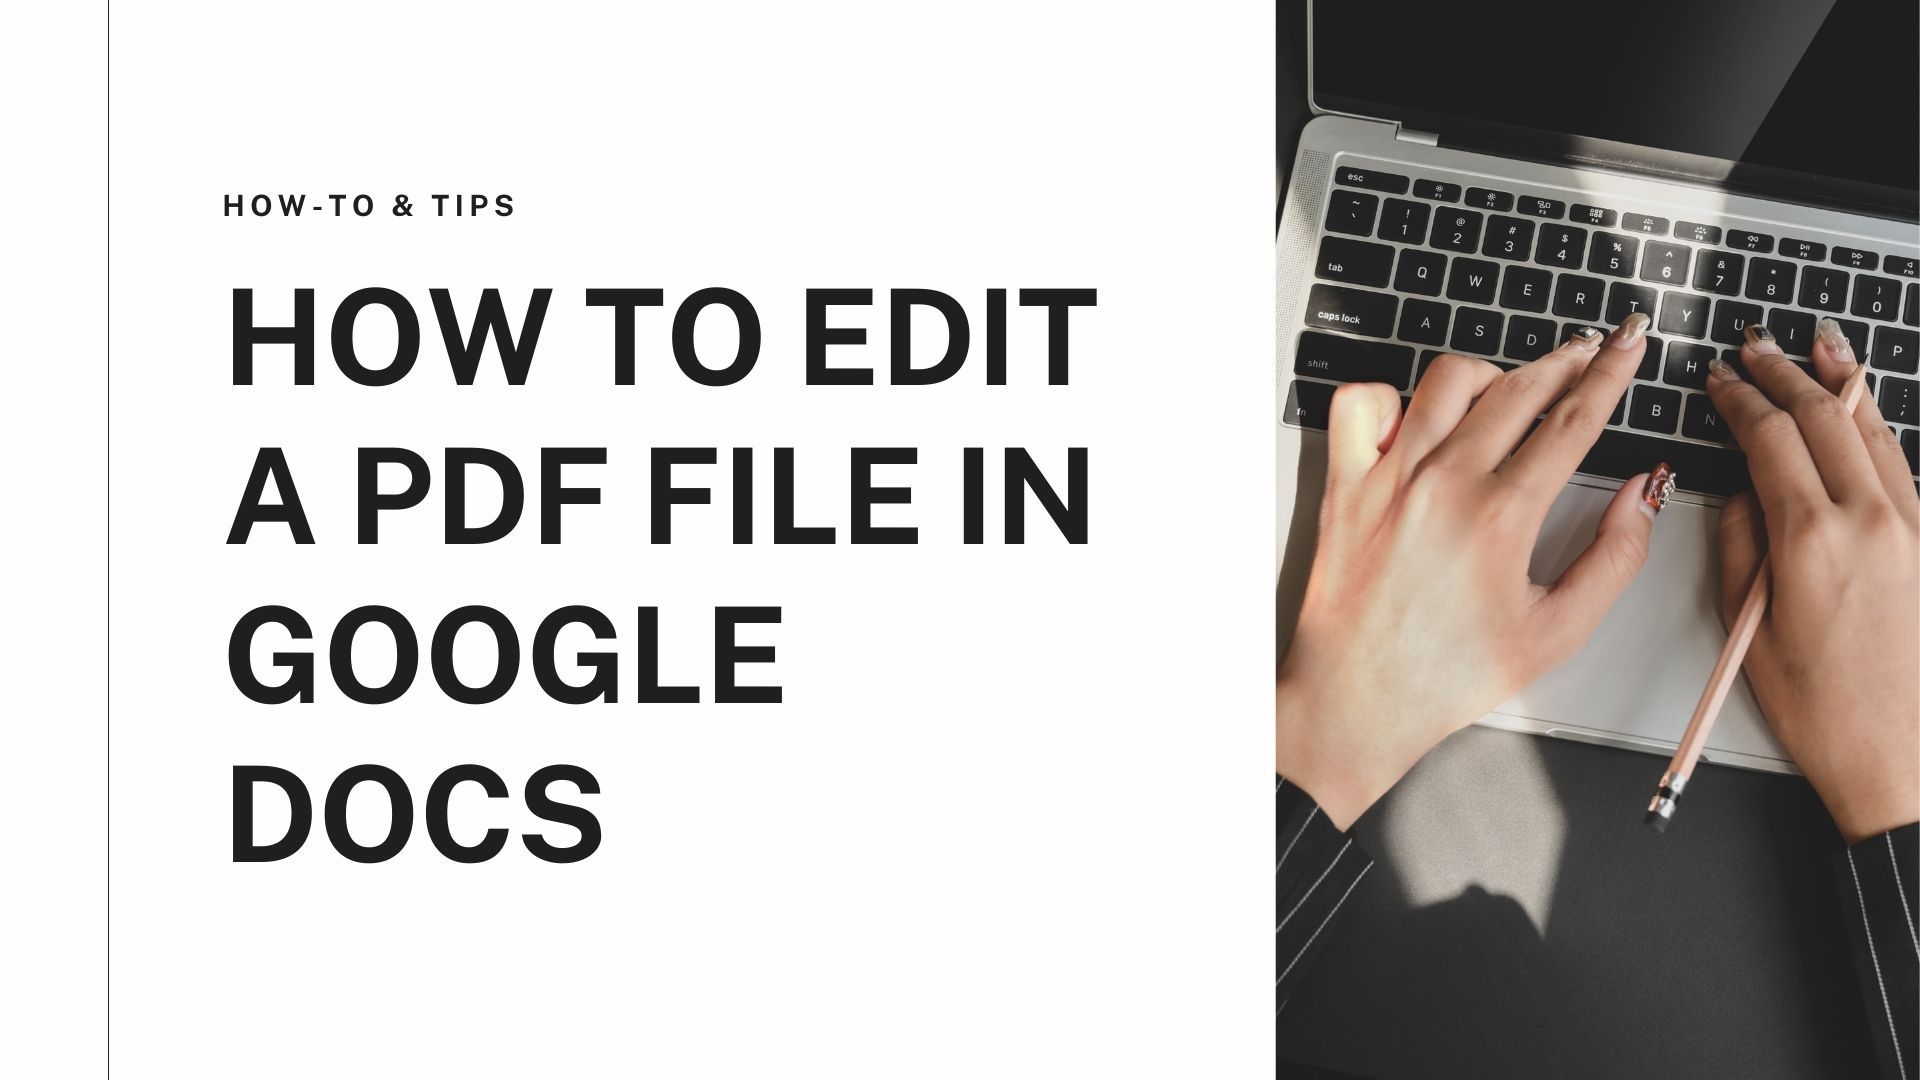 How to edit a PDF file in Google Docs.jpg